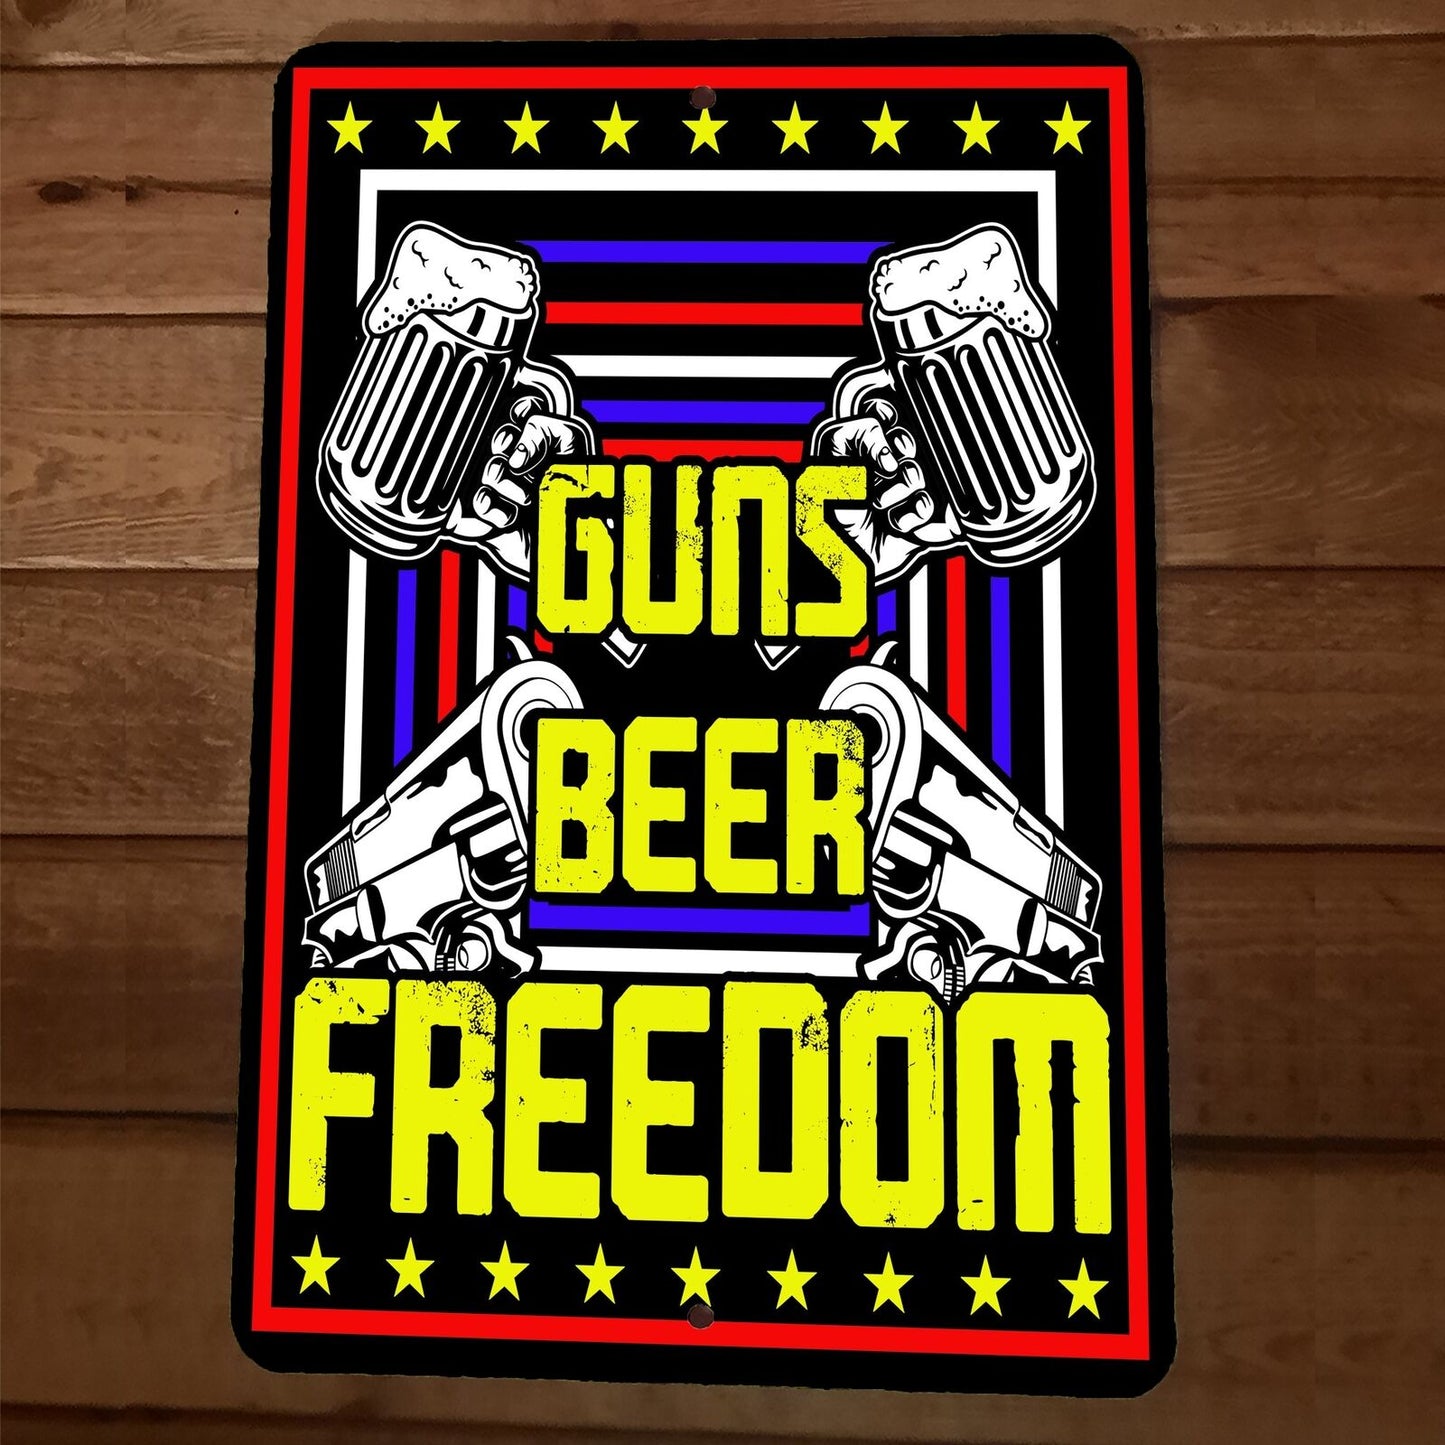 Guns Beer Freedom USA America 8x12 Metal Wall Sign Poster July 4th